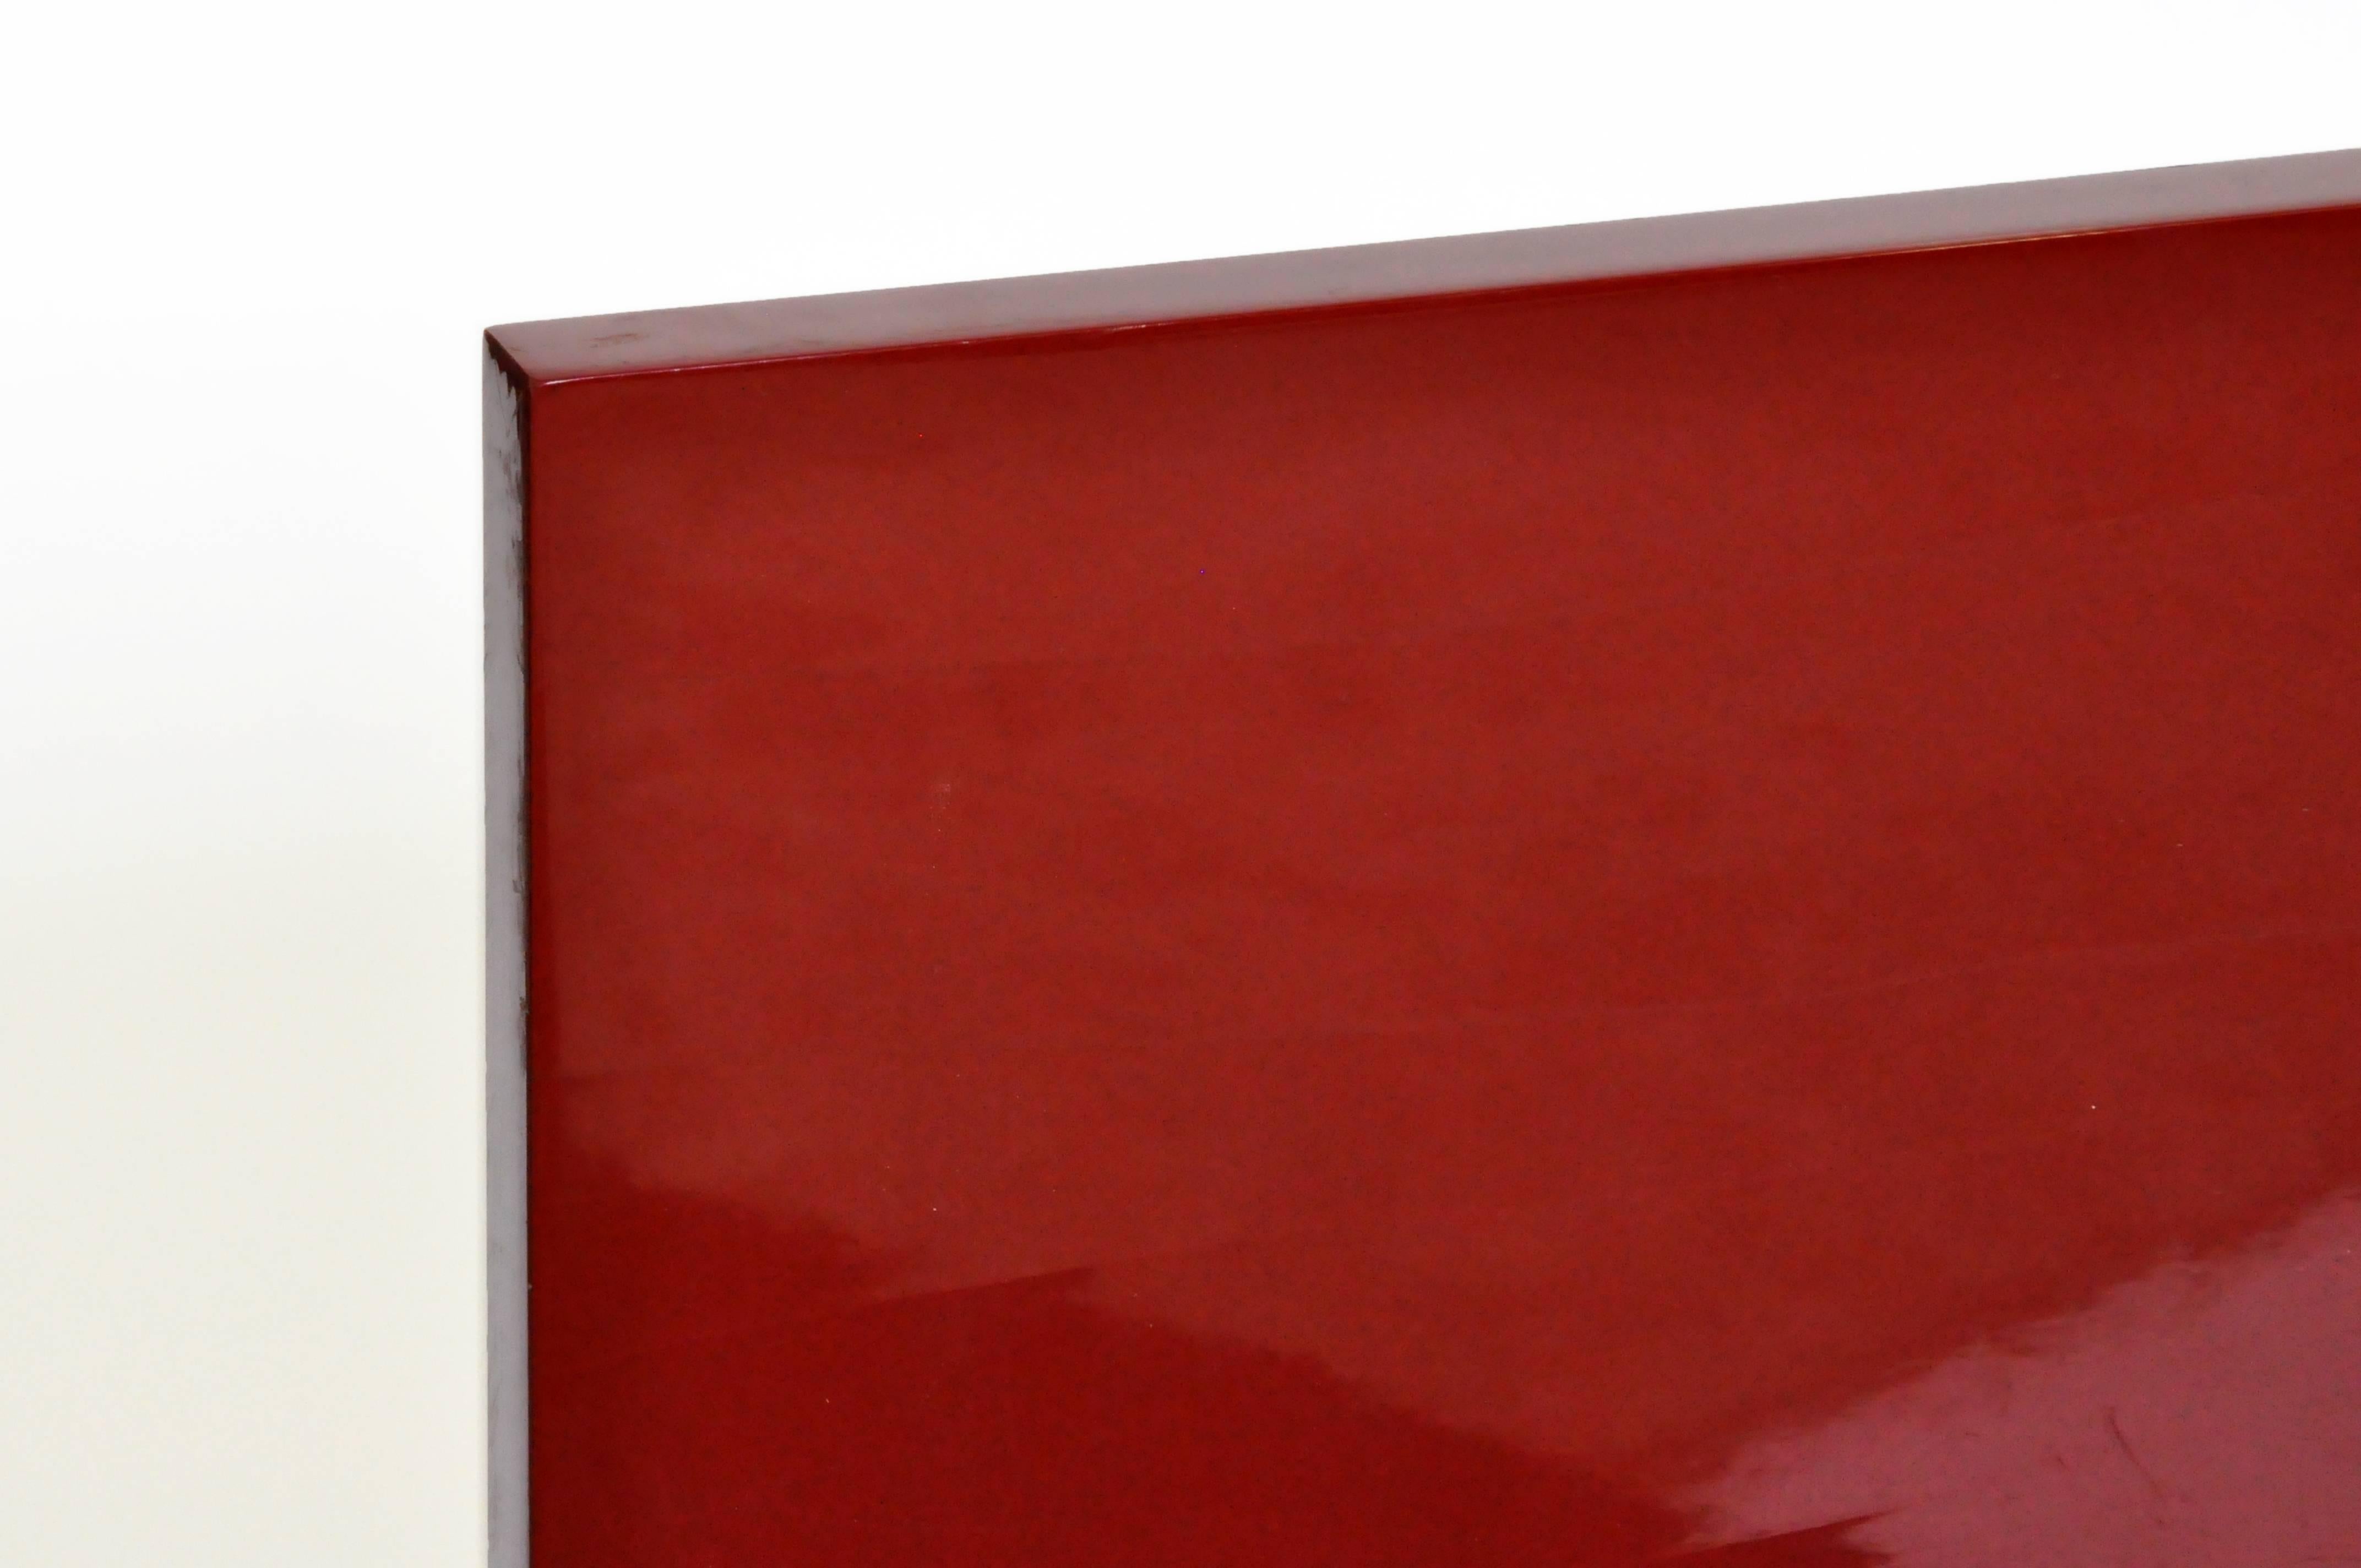 Late 20th Century Contemporary Red Lacquered Wall Art